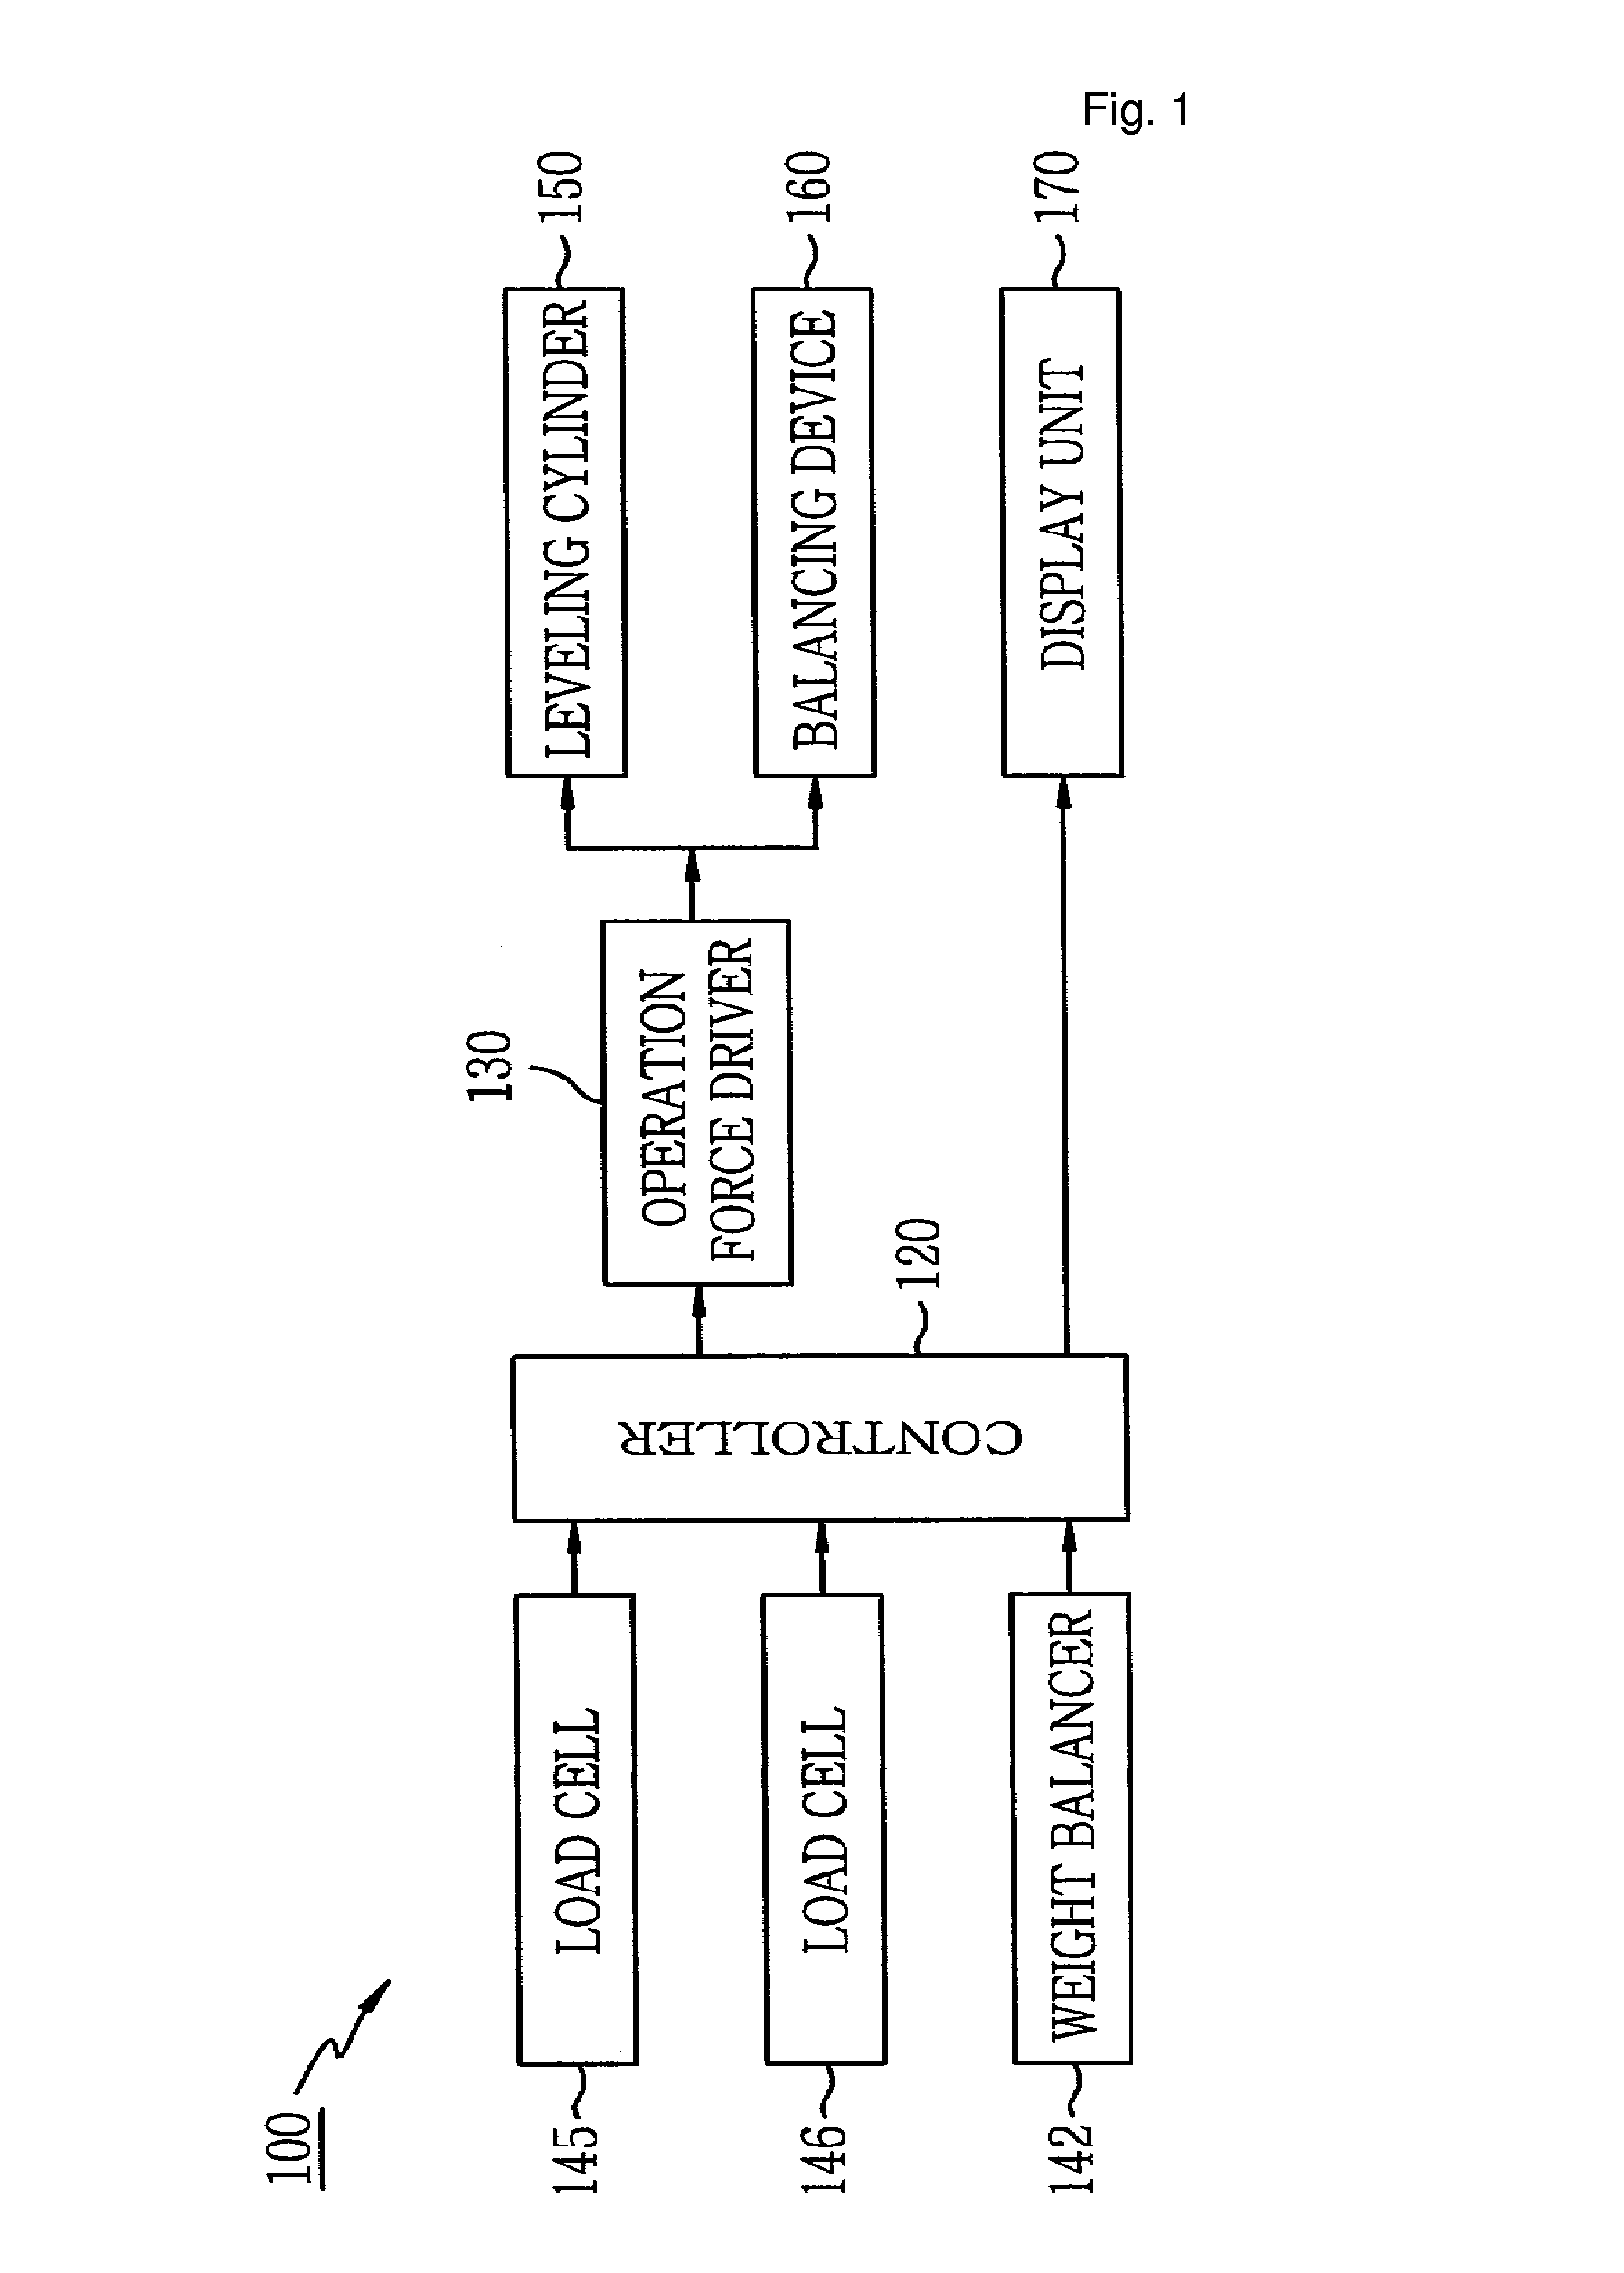 Weight balancer and pipe joining method